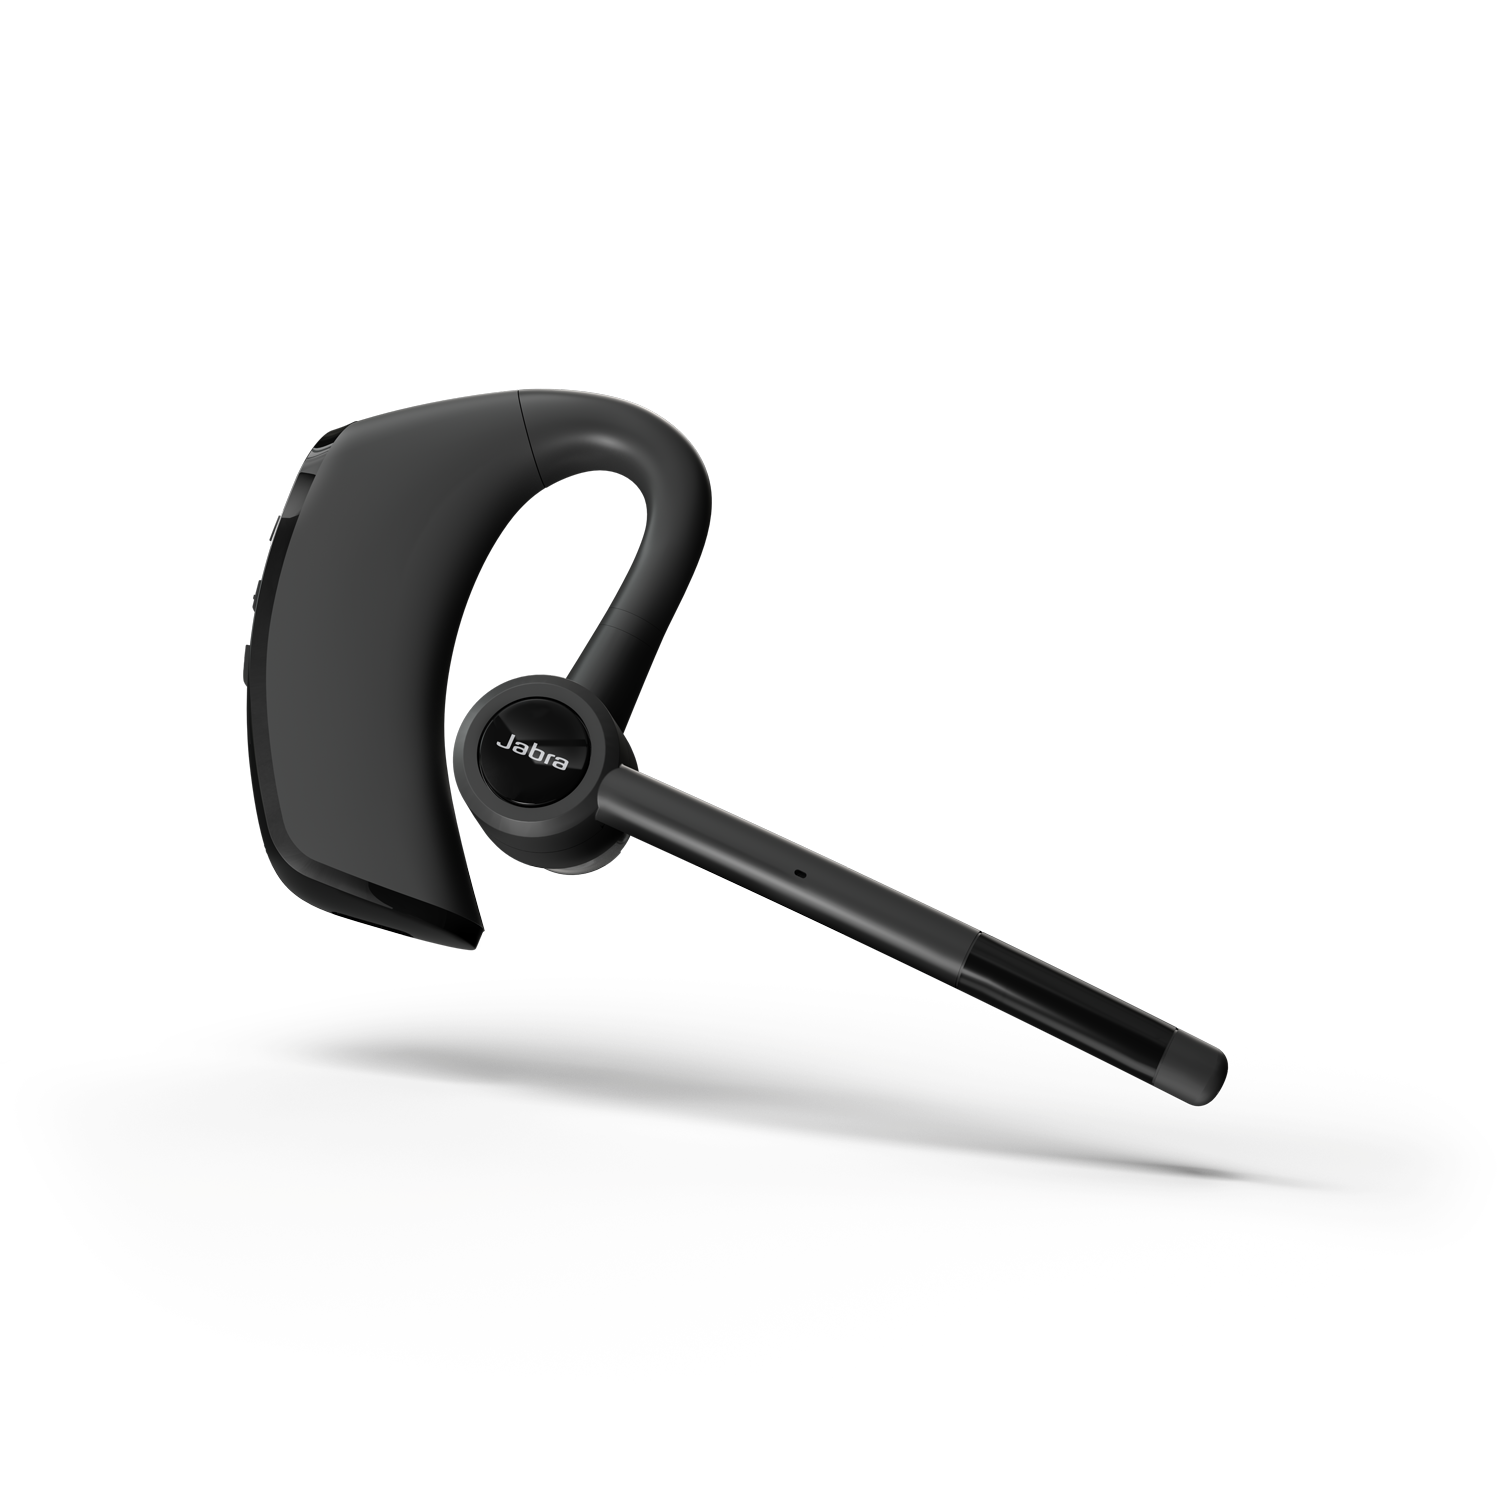 Premium Bluetooth® headset 2 microphones with noise-cancelling